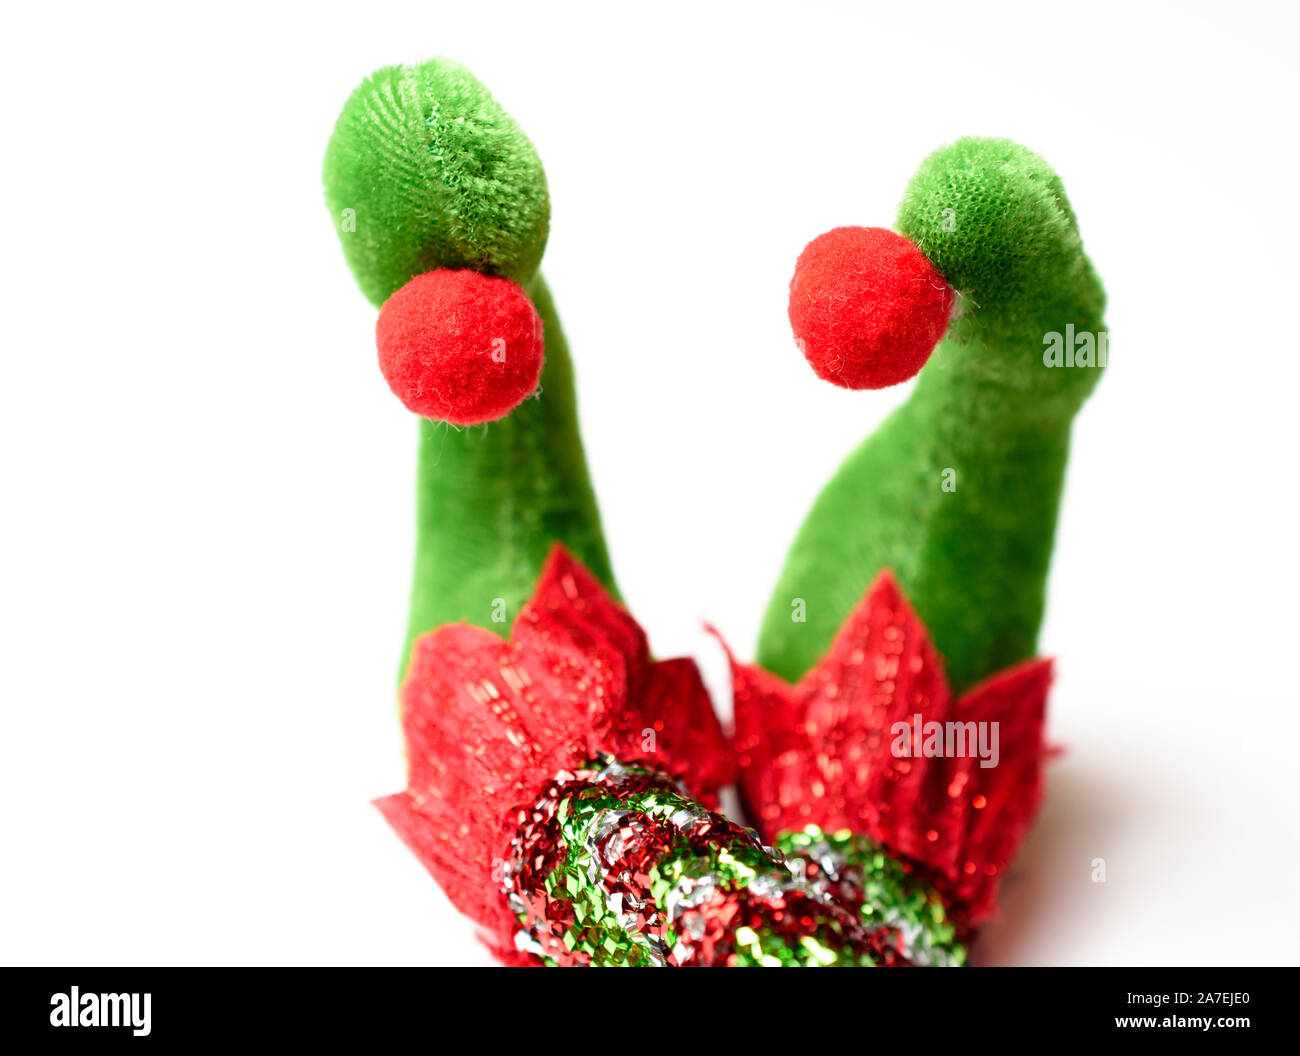 Adorable plush elf feet wearing red white and green pointy shoes with pom poms and glittered stockings with legs crossed Stock Photo